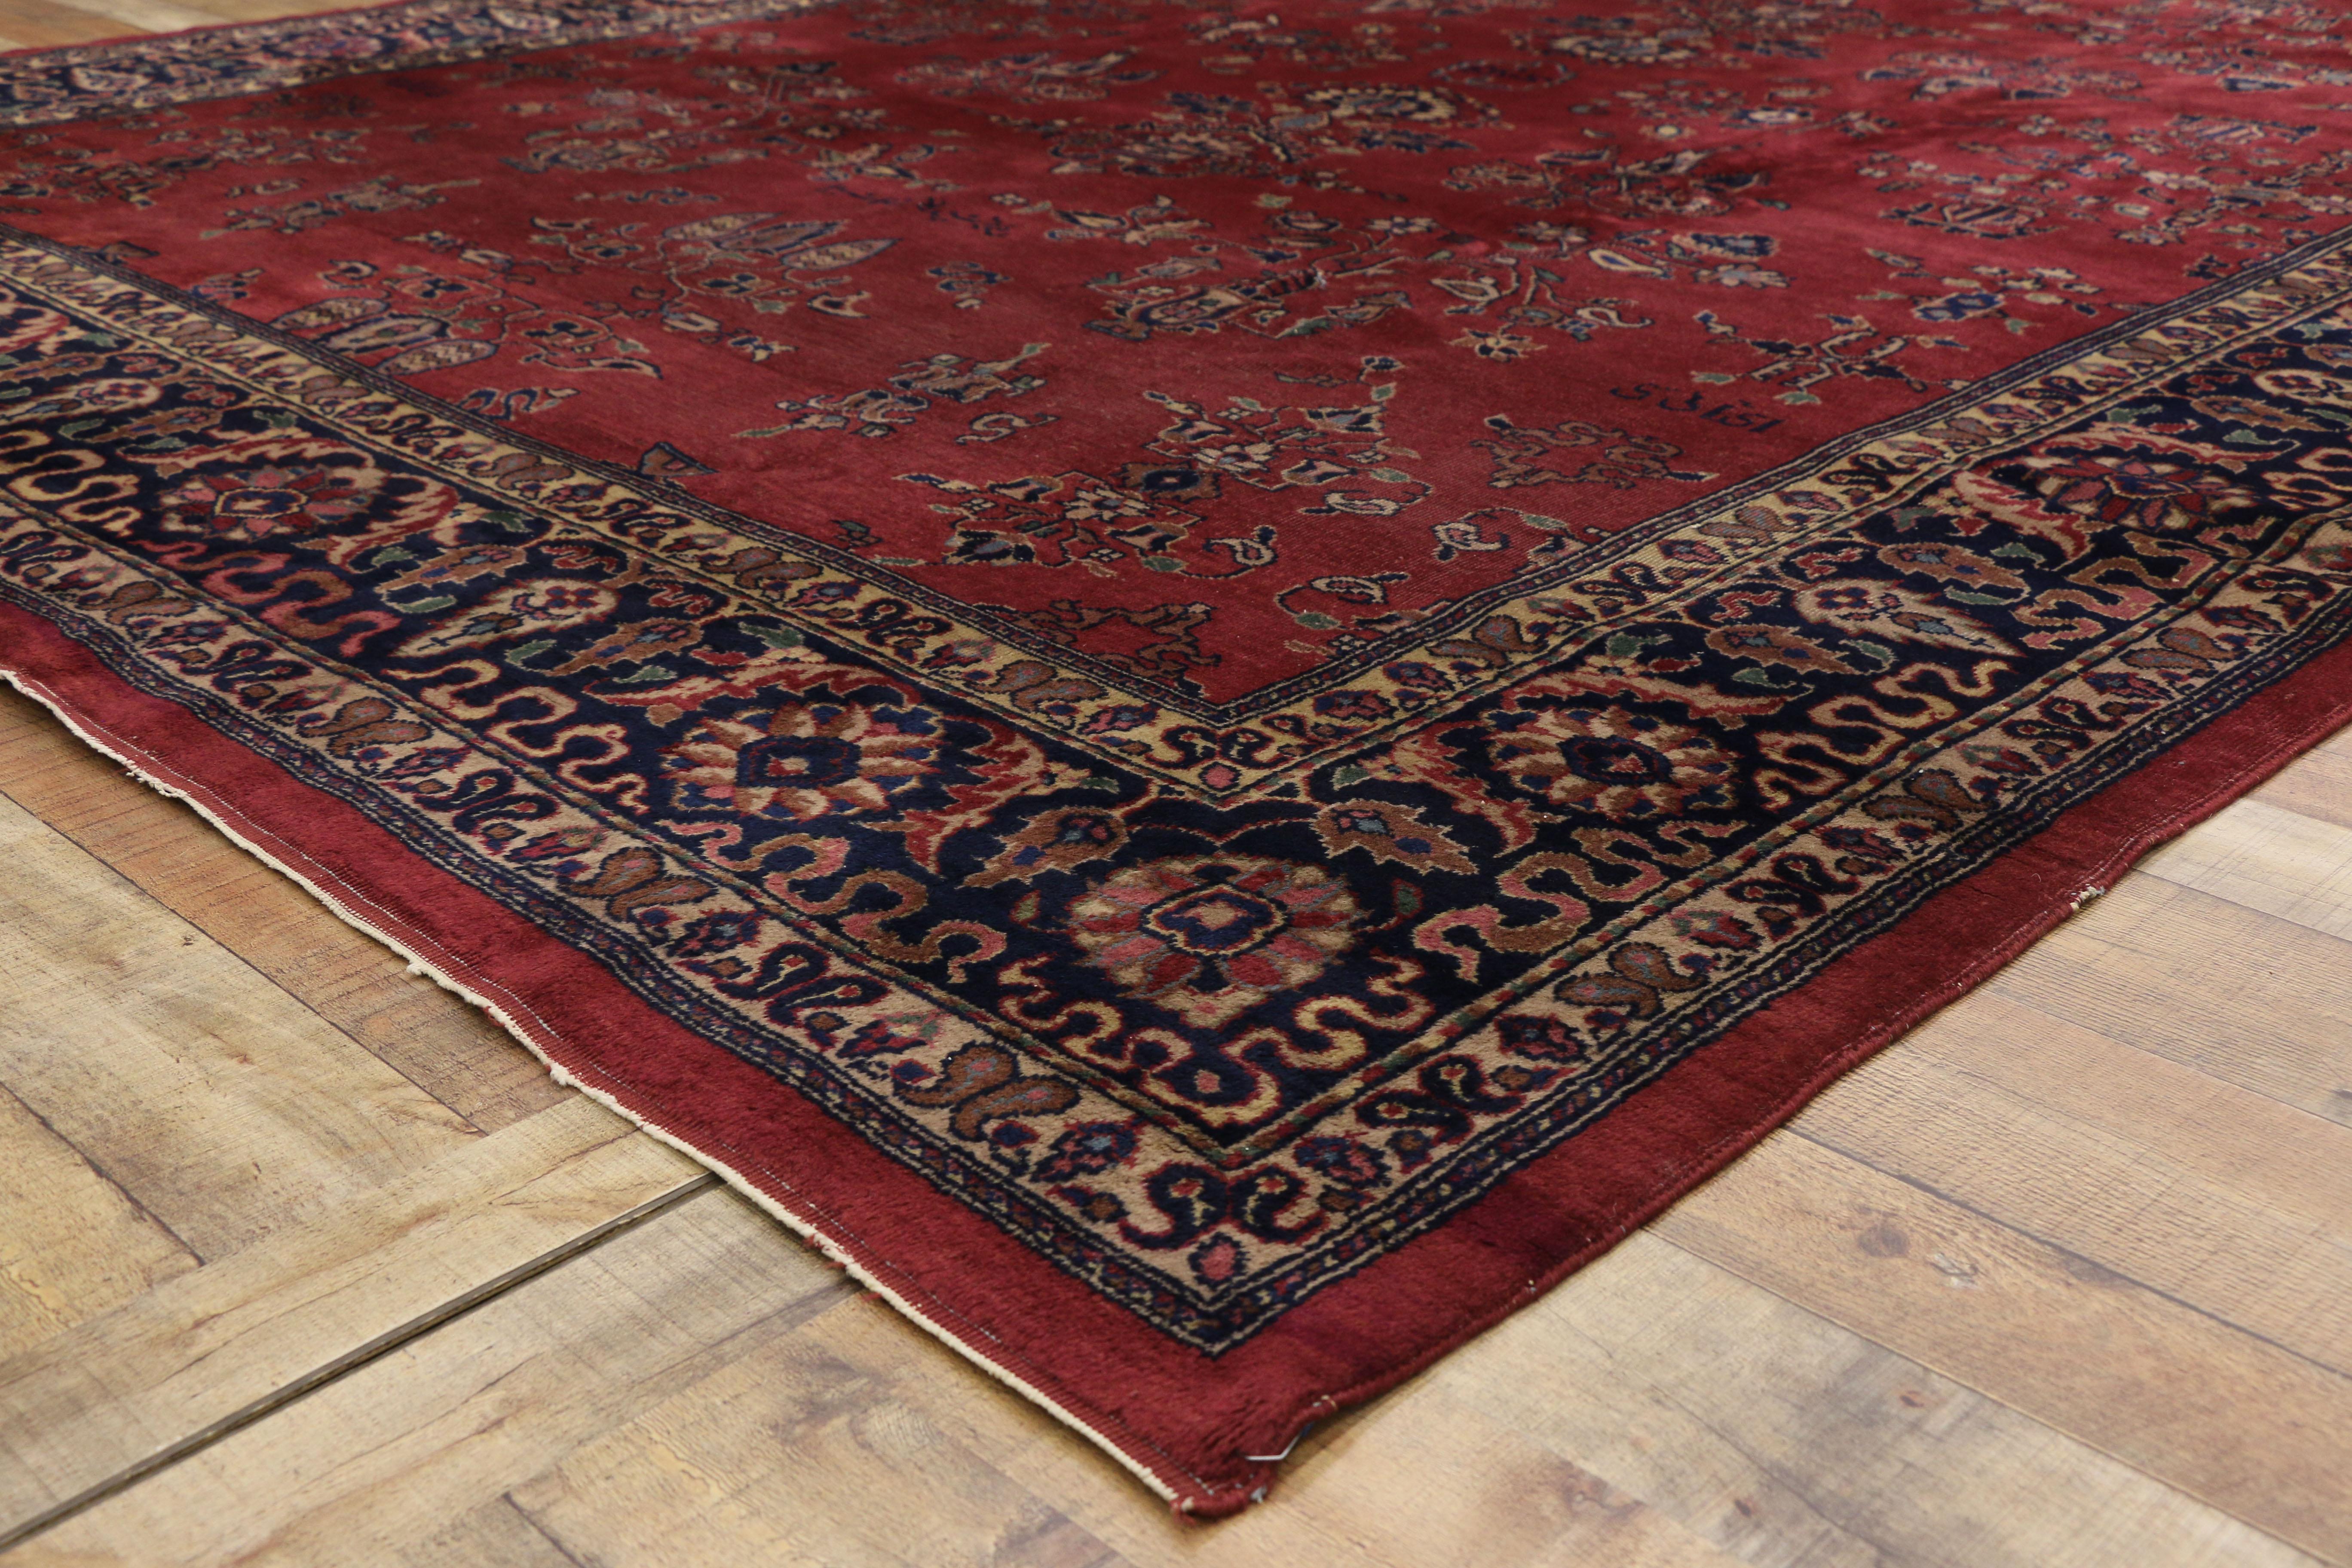 Antique Turkish Sparta Rug with Regency Victorian Style In Good Condition For Sale In Dallas, TX